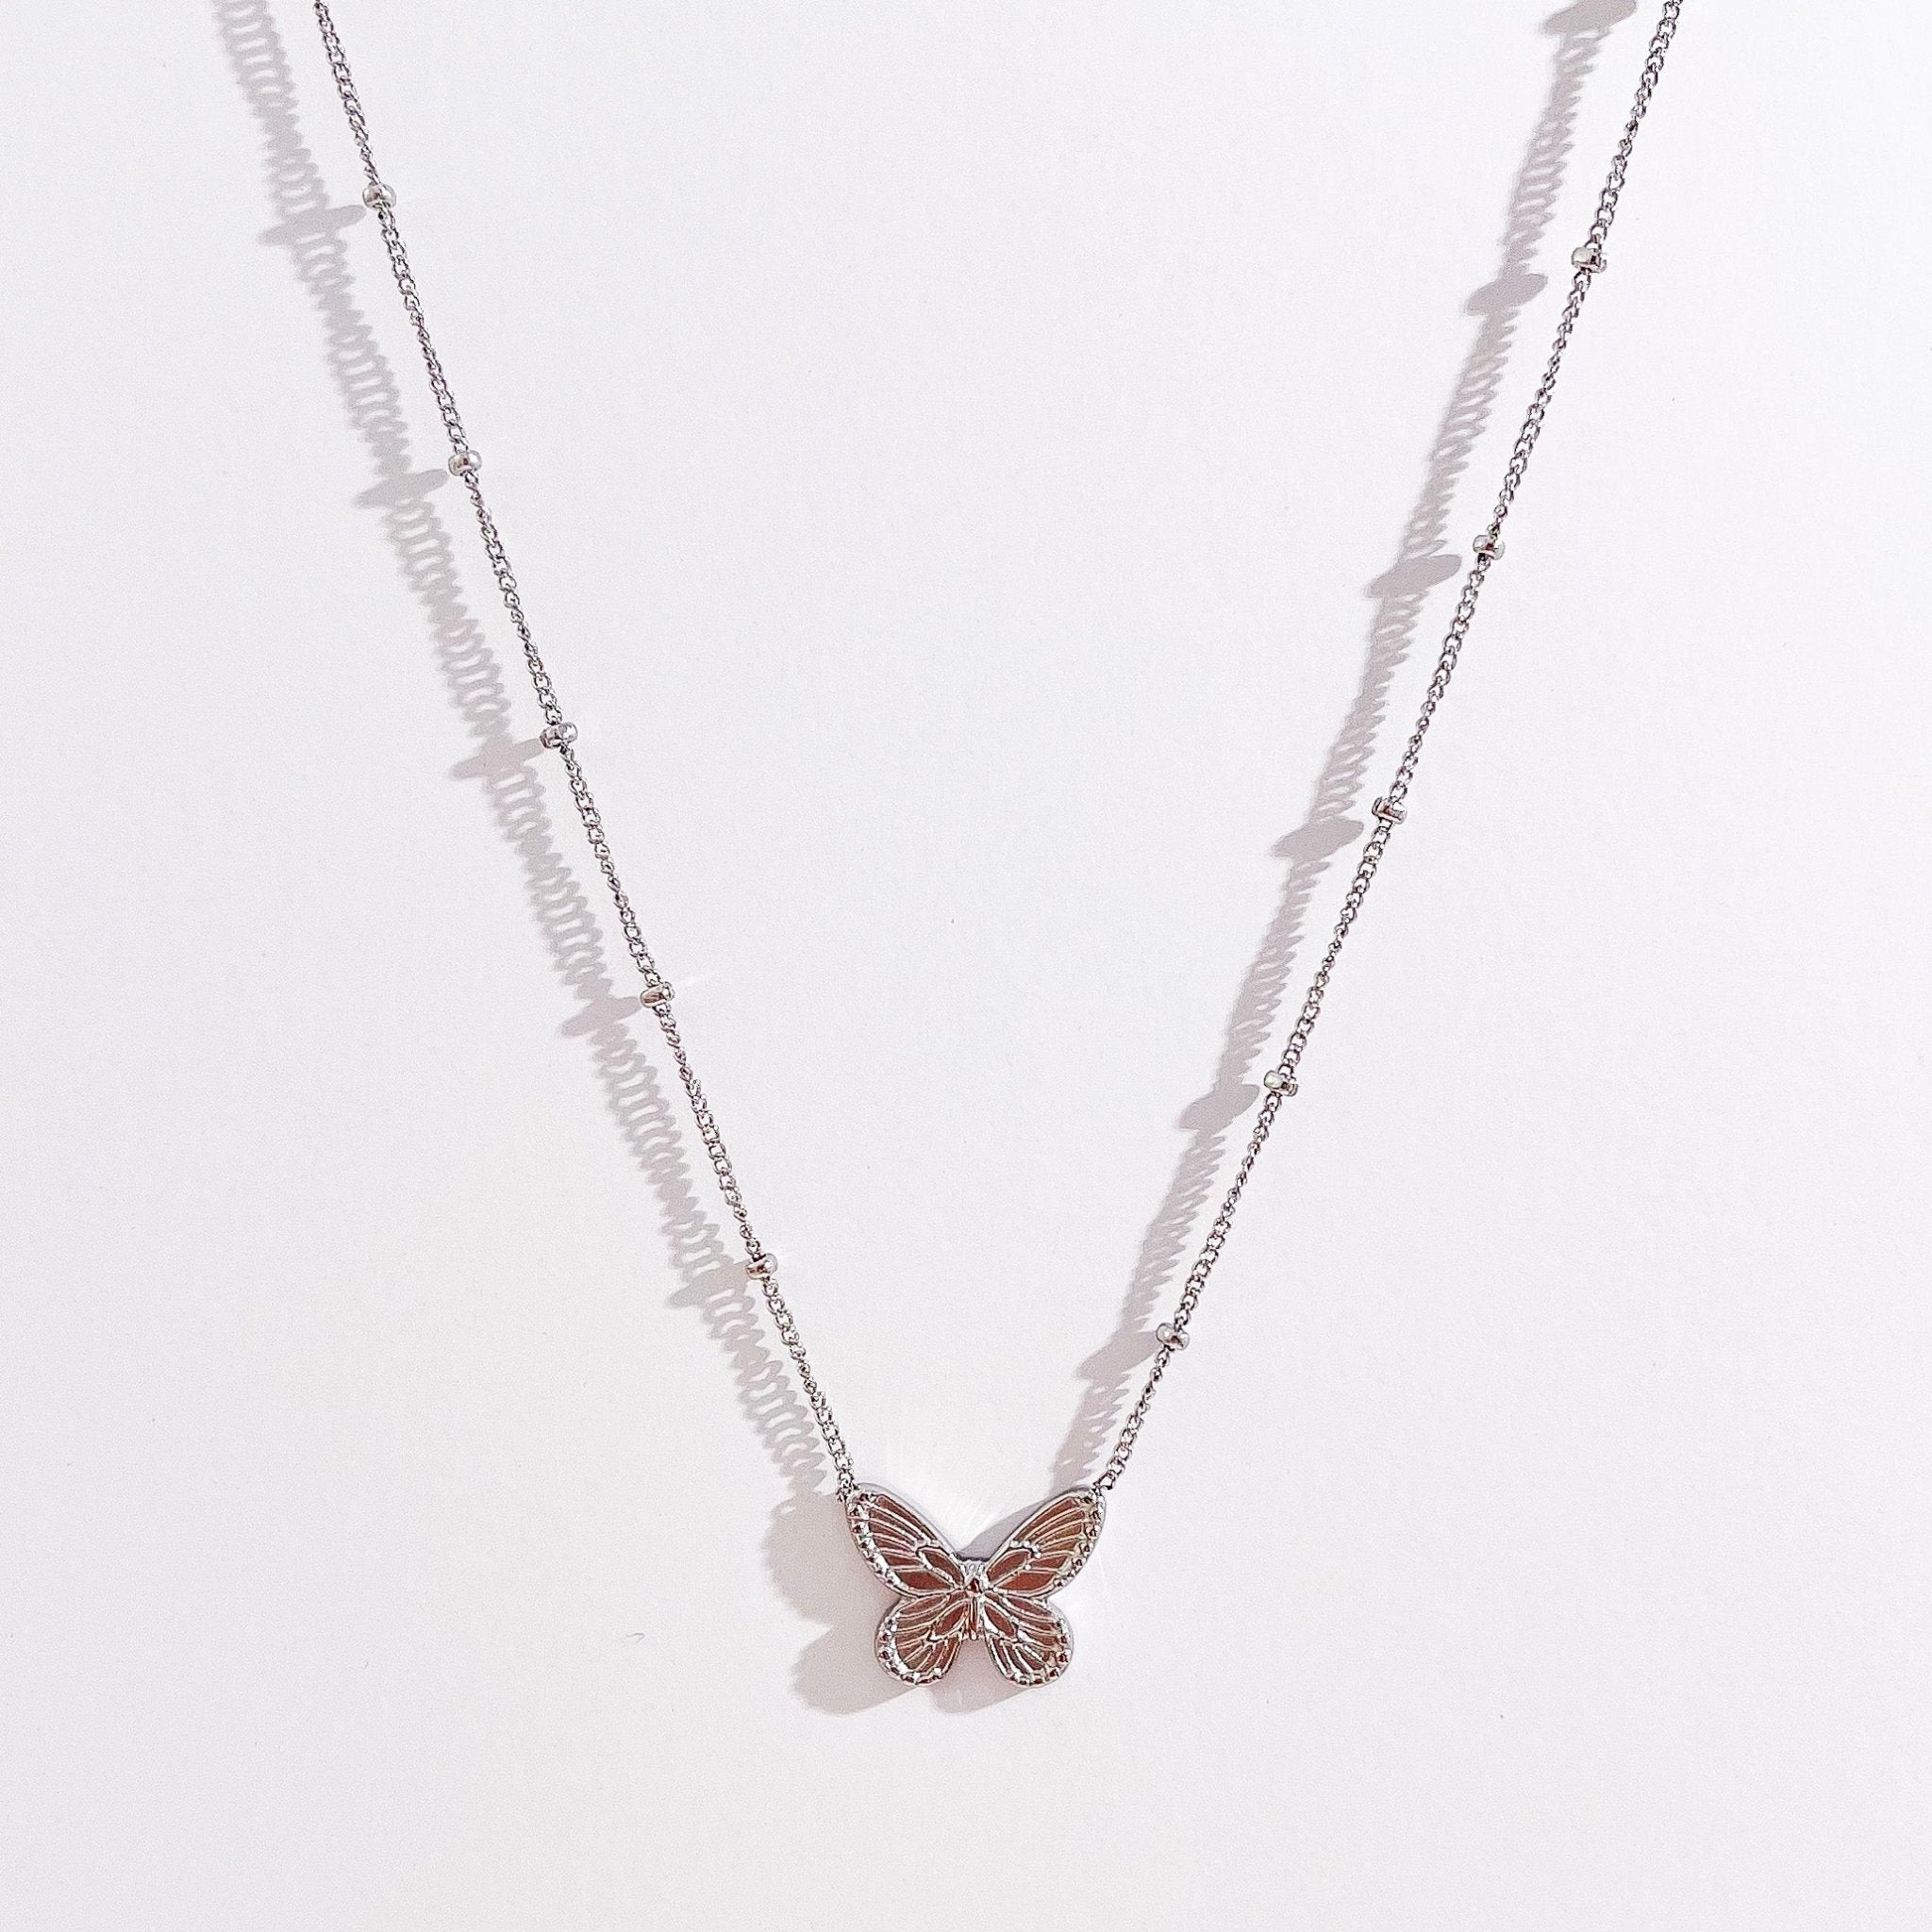 Butterfly Necklace in Silver - Flaire & Co.